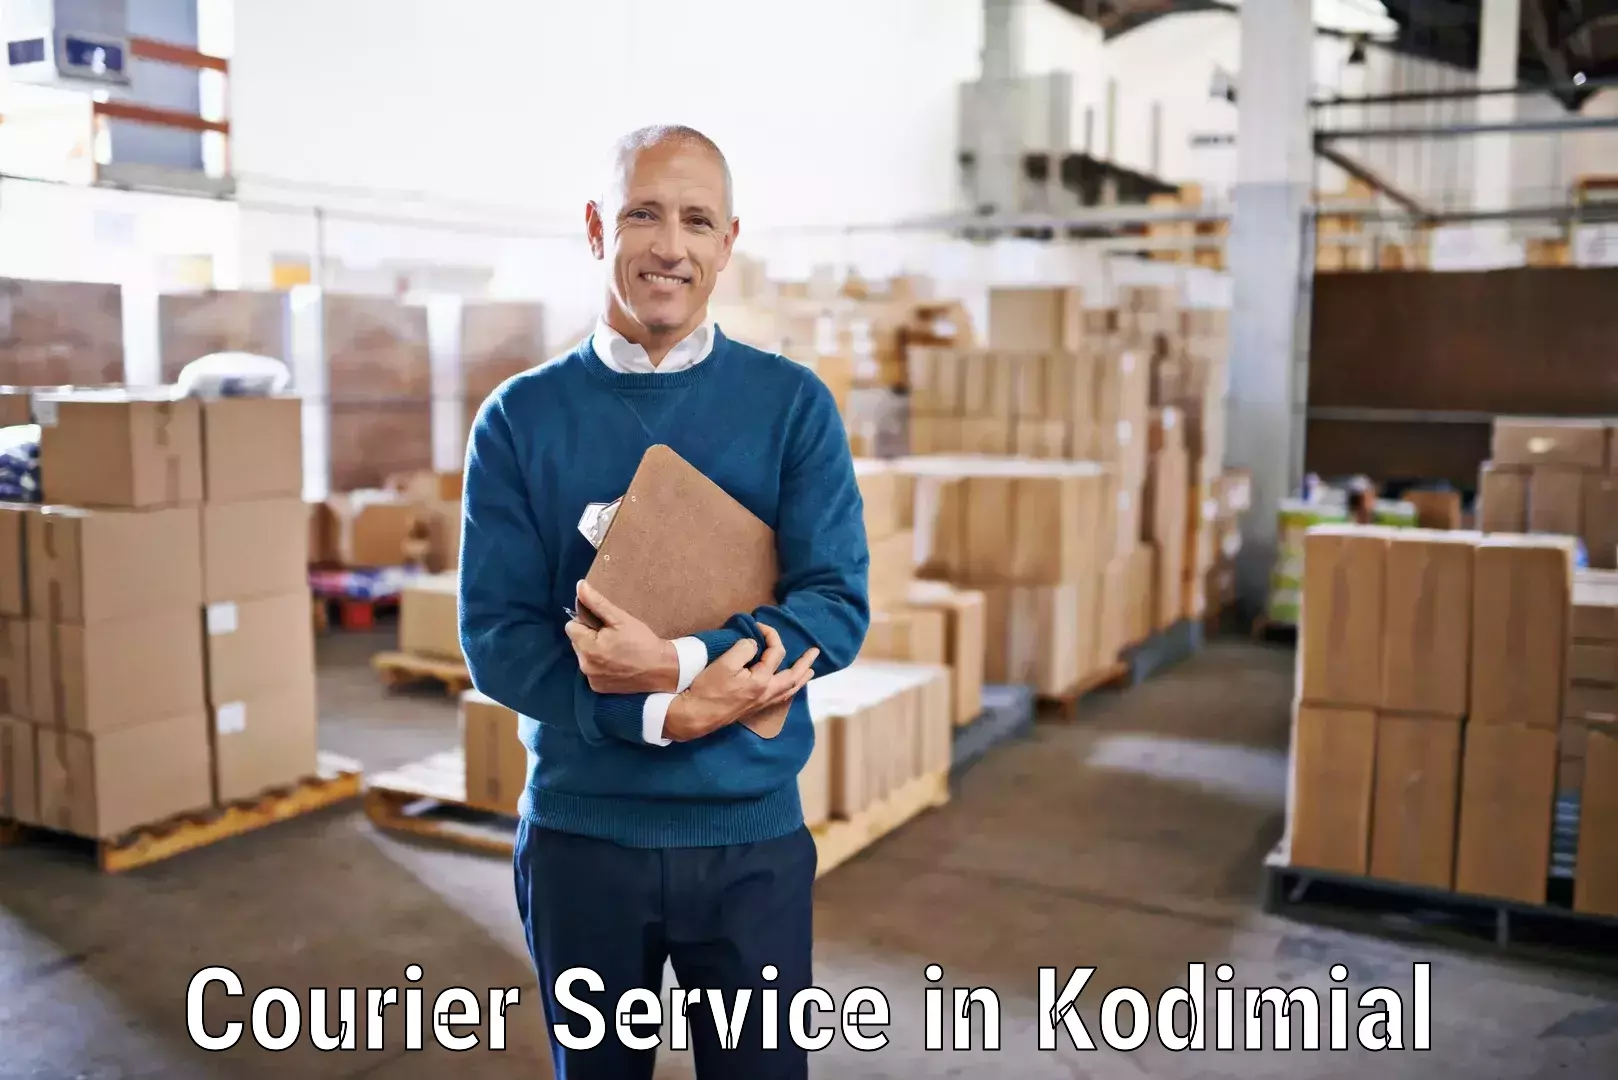 Rapid shipping services in Kodimial